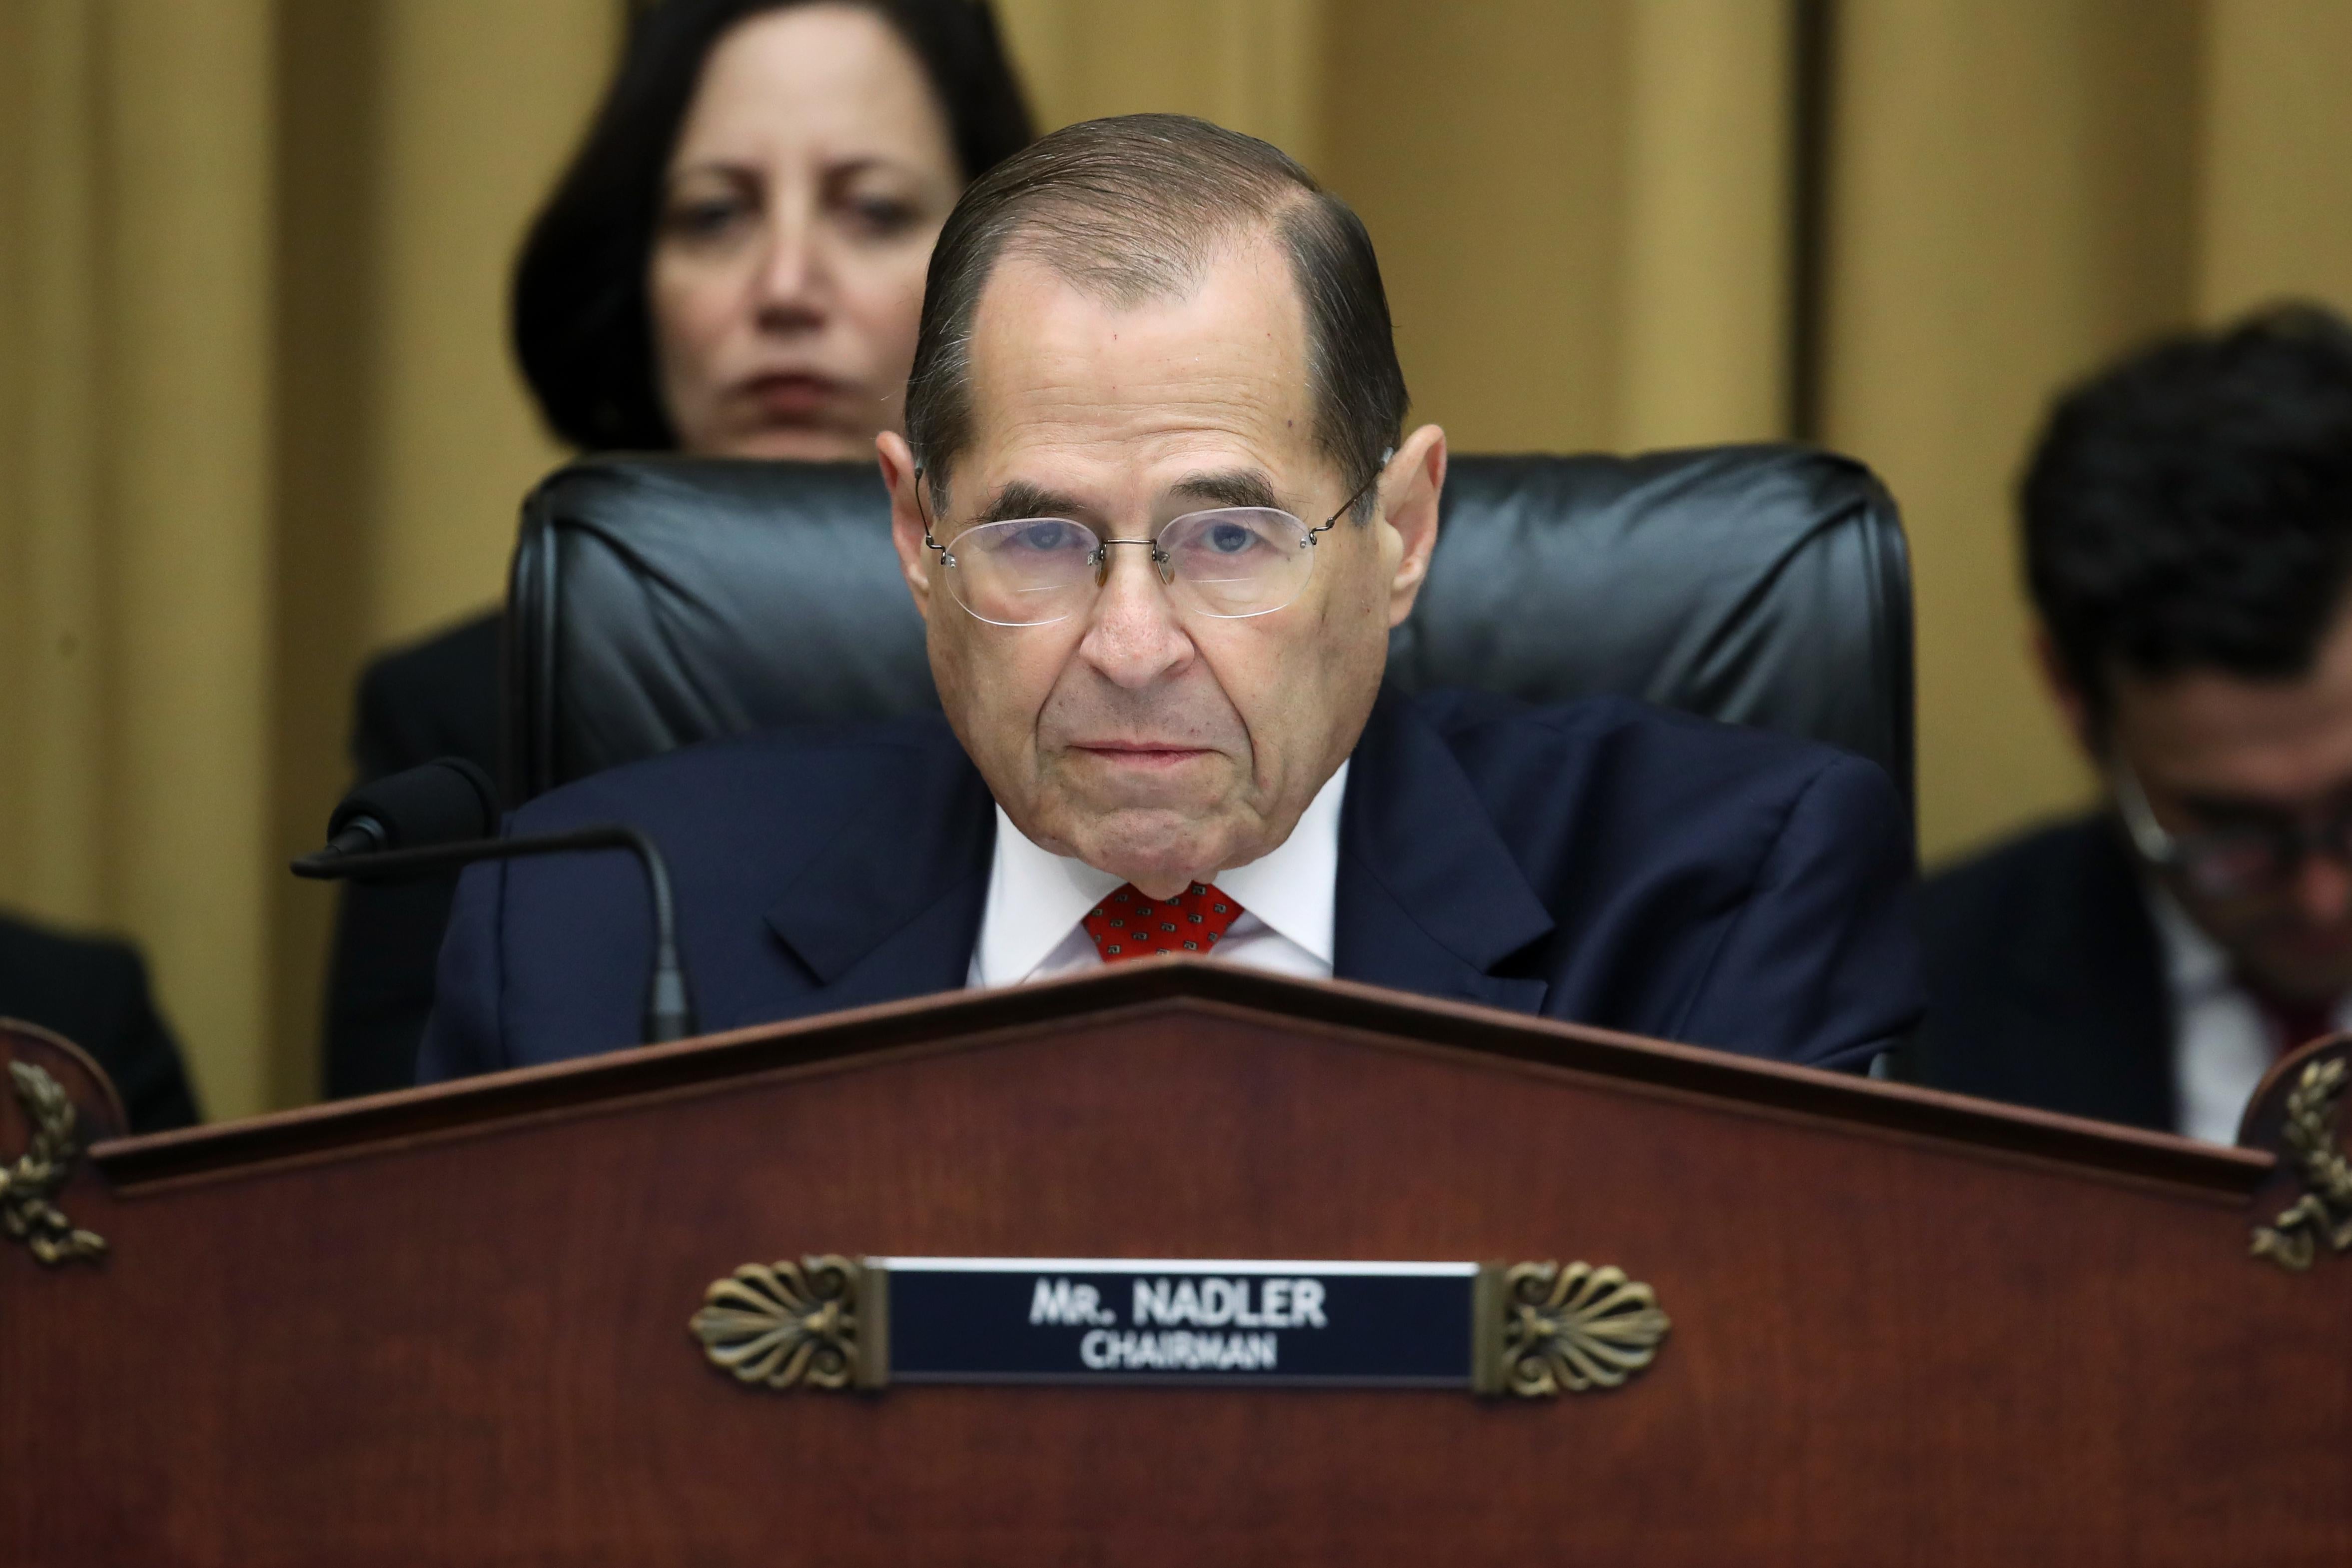 Chairman of the House Judiciary Committee Rep. Jerry Nadler (D-NY) questions former Special Counsel Robert Mueller in the Rayburn House Office Building July 24, 2019 in Washington, D.C.